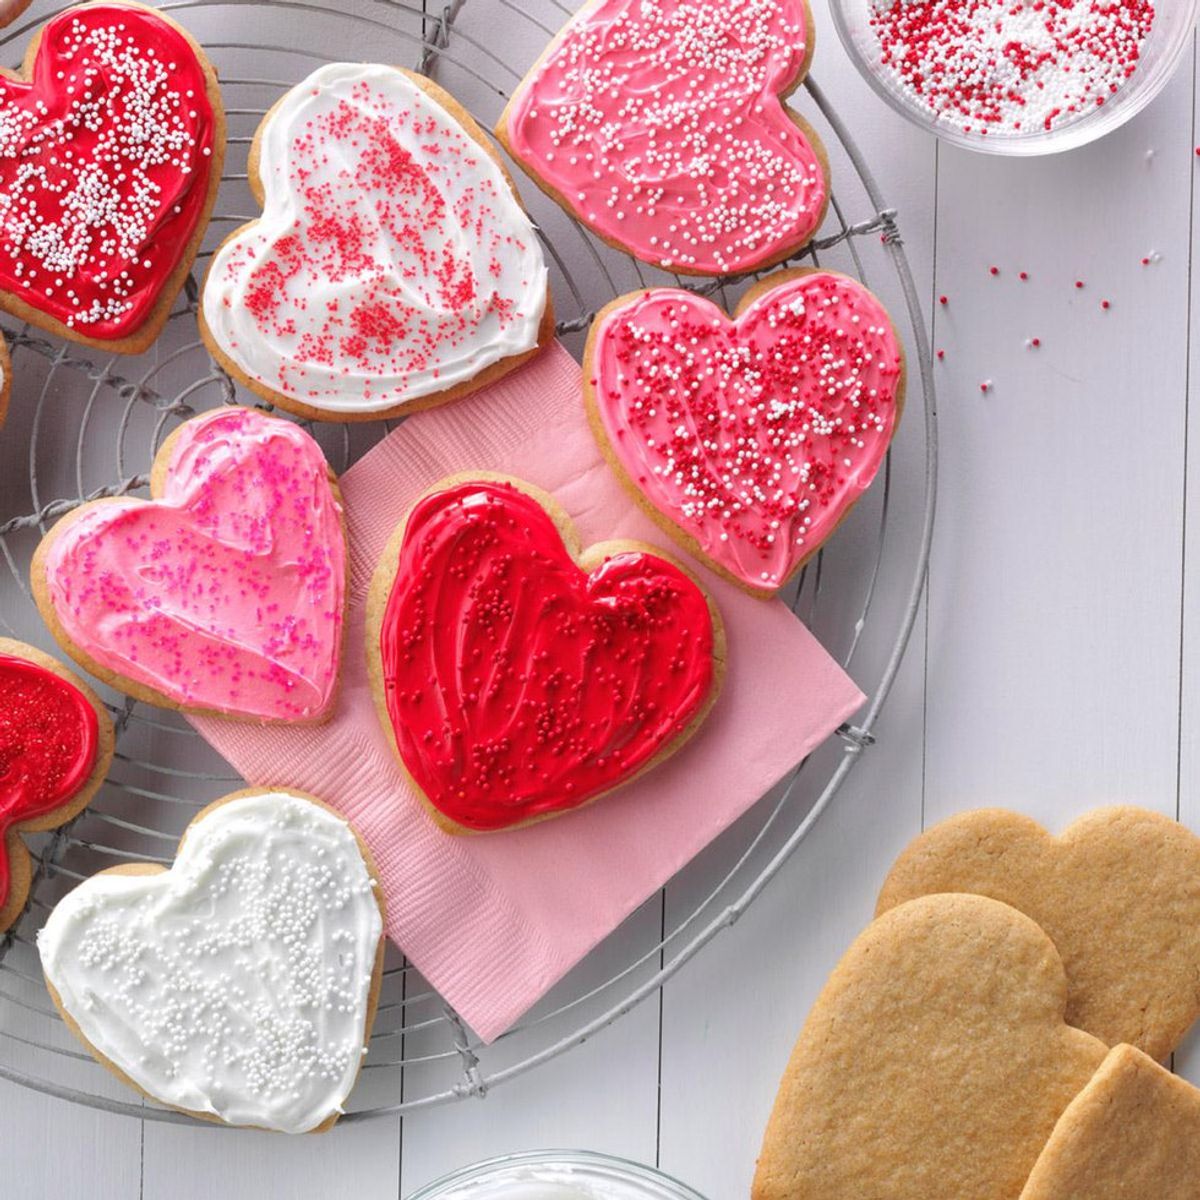 5 Ways To Fall In Love With Valentine's Day